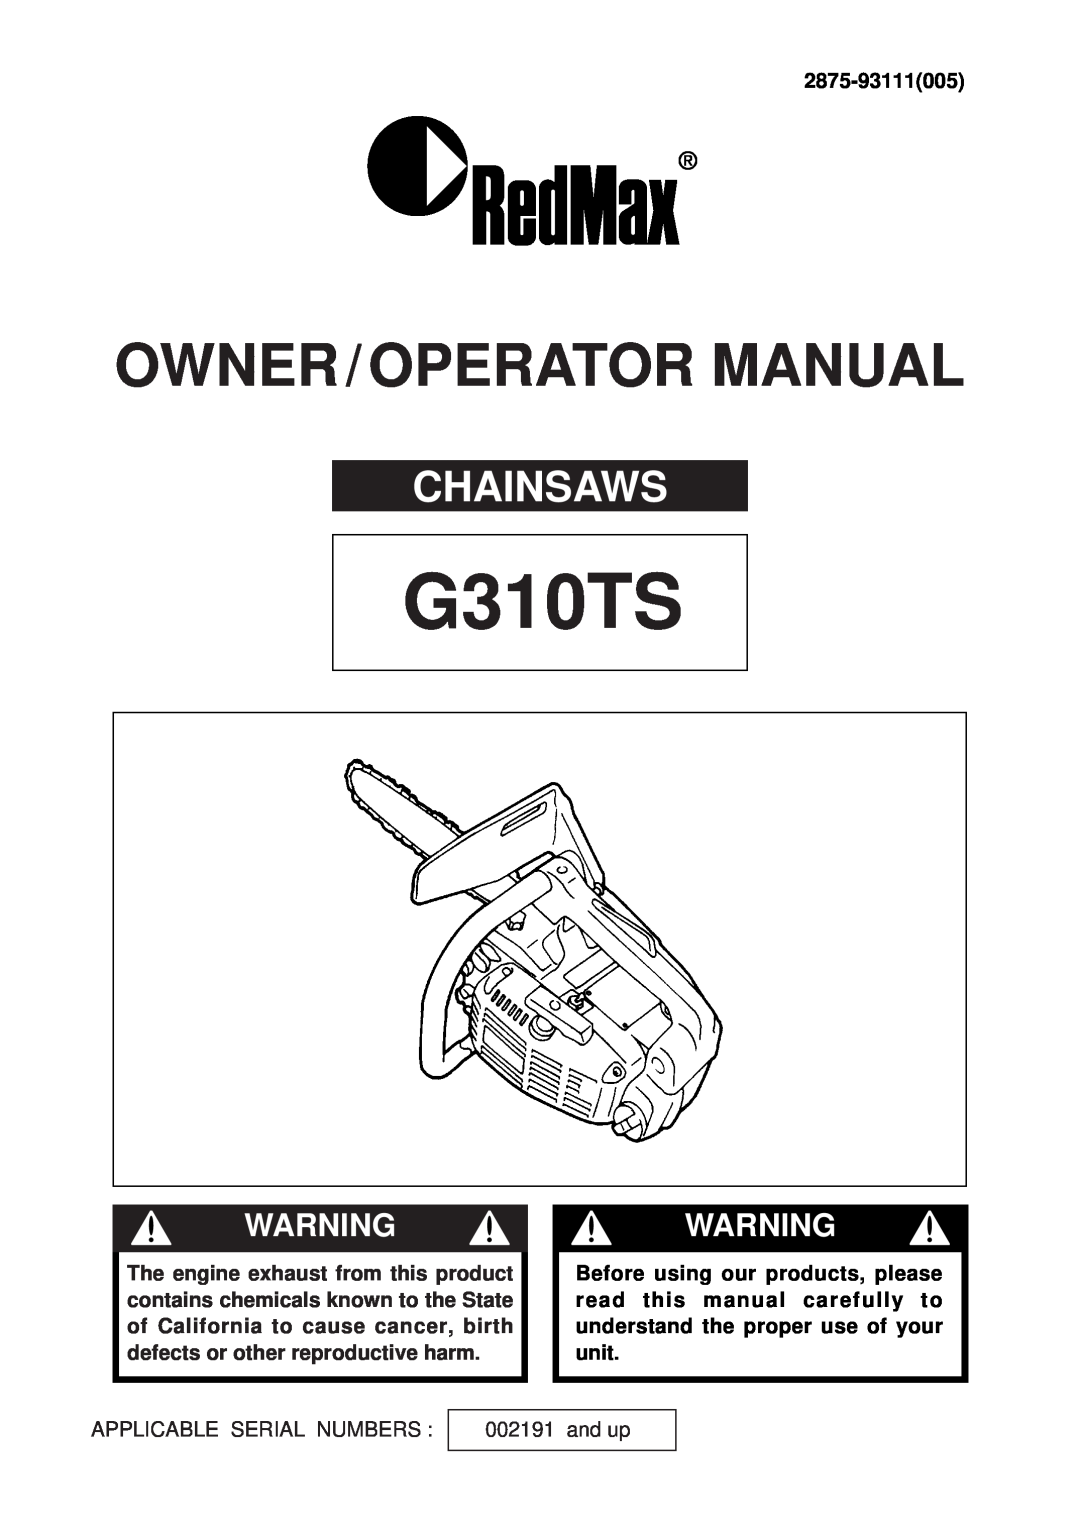 RedMax G310TS manual Chainsaws, 2875-93111005, Owner / Operator Manual 